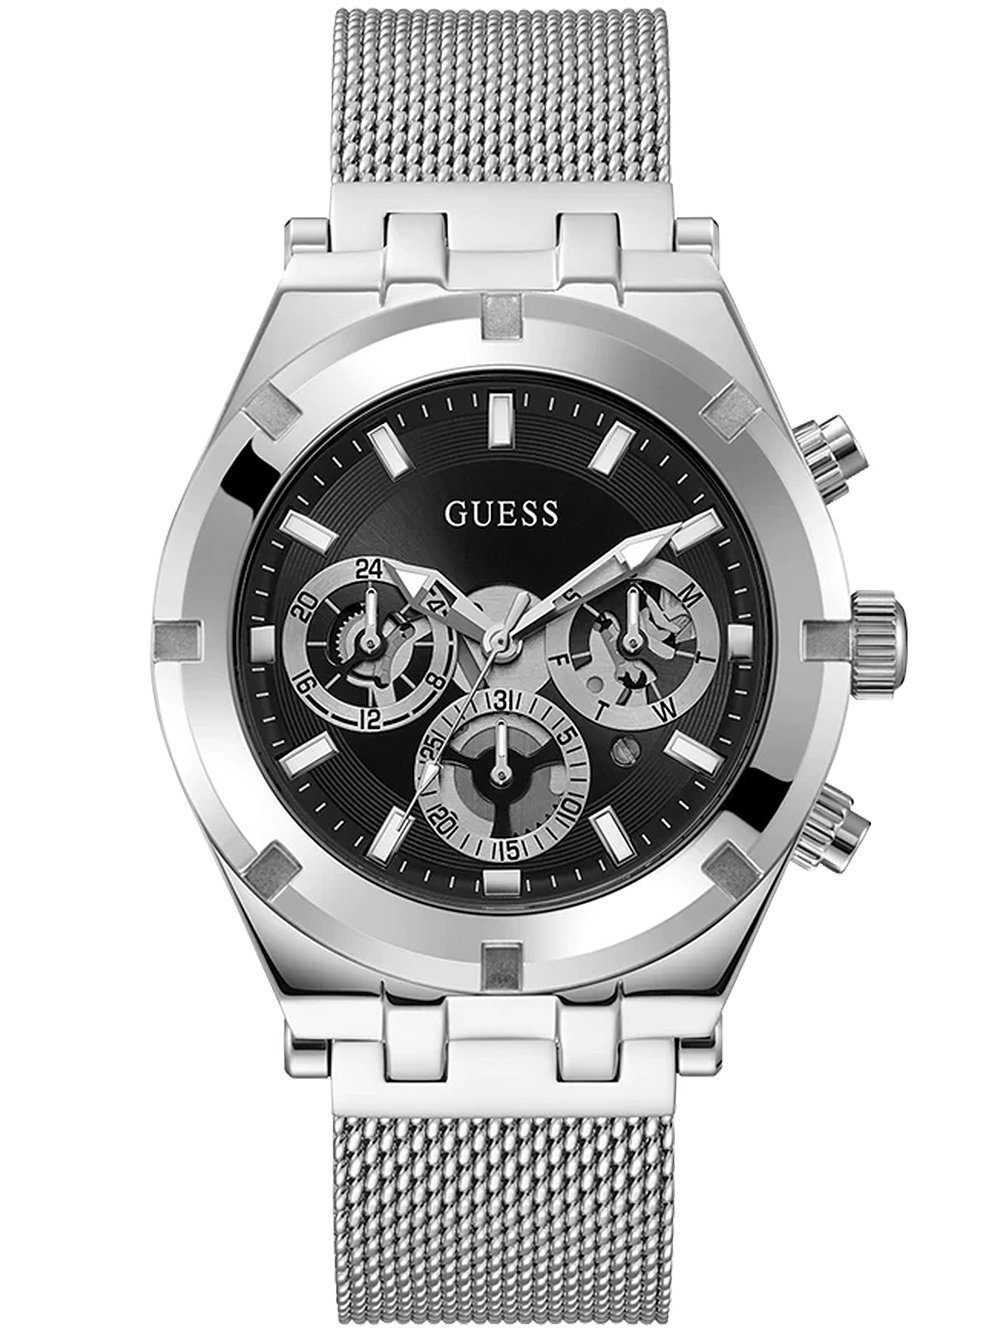 Guess Multifunktionsuhr Guess GW0582G1 Herrenuhr 5ATM 44mm Continental